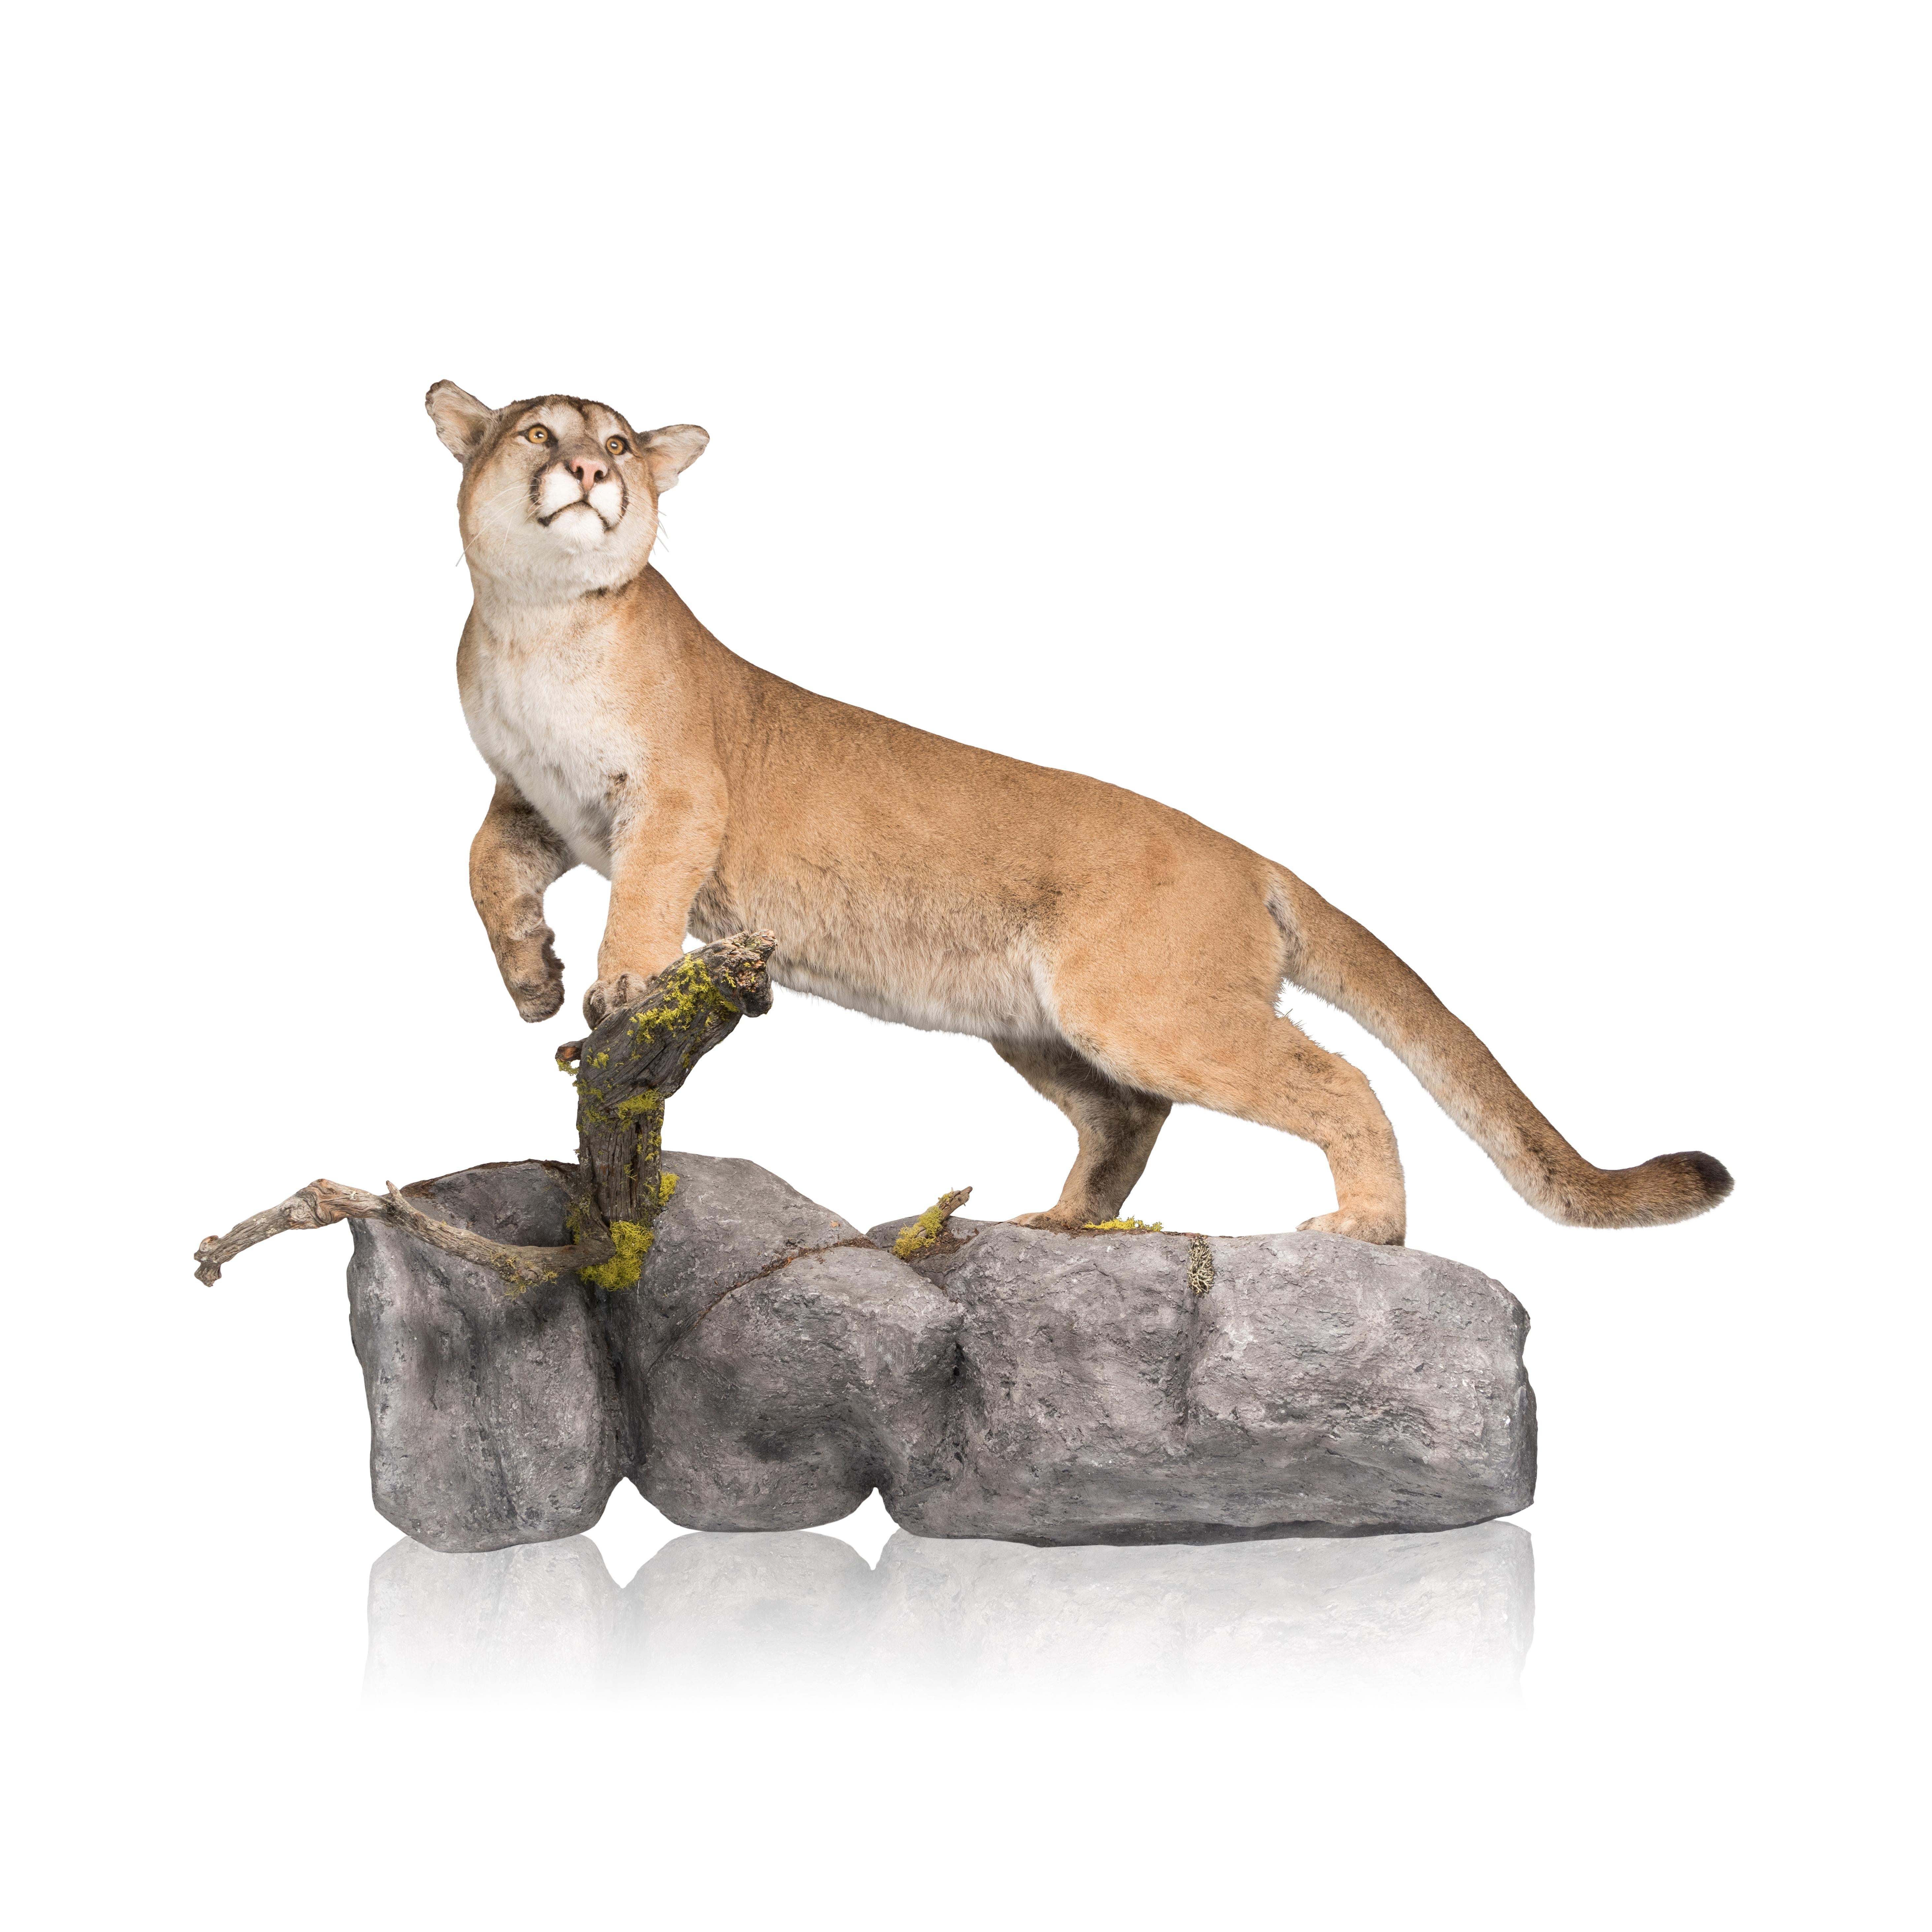 Large male cougar on faux rock and branch mount. In walking position. Harvested in British Columbia. 6’L x 4’H protrudes 27”

PERIOD: Contemporary
ORIGIN: British Columbia, Canada
SIZE: 6’L x 4’H protrudes 27”

Family Owned & Operated
Cisco’s